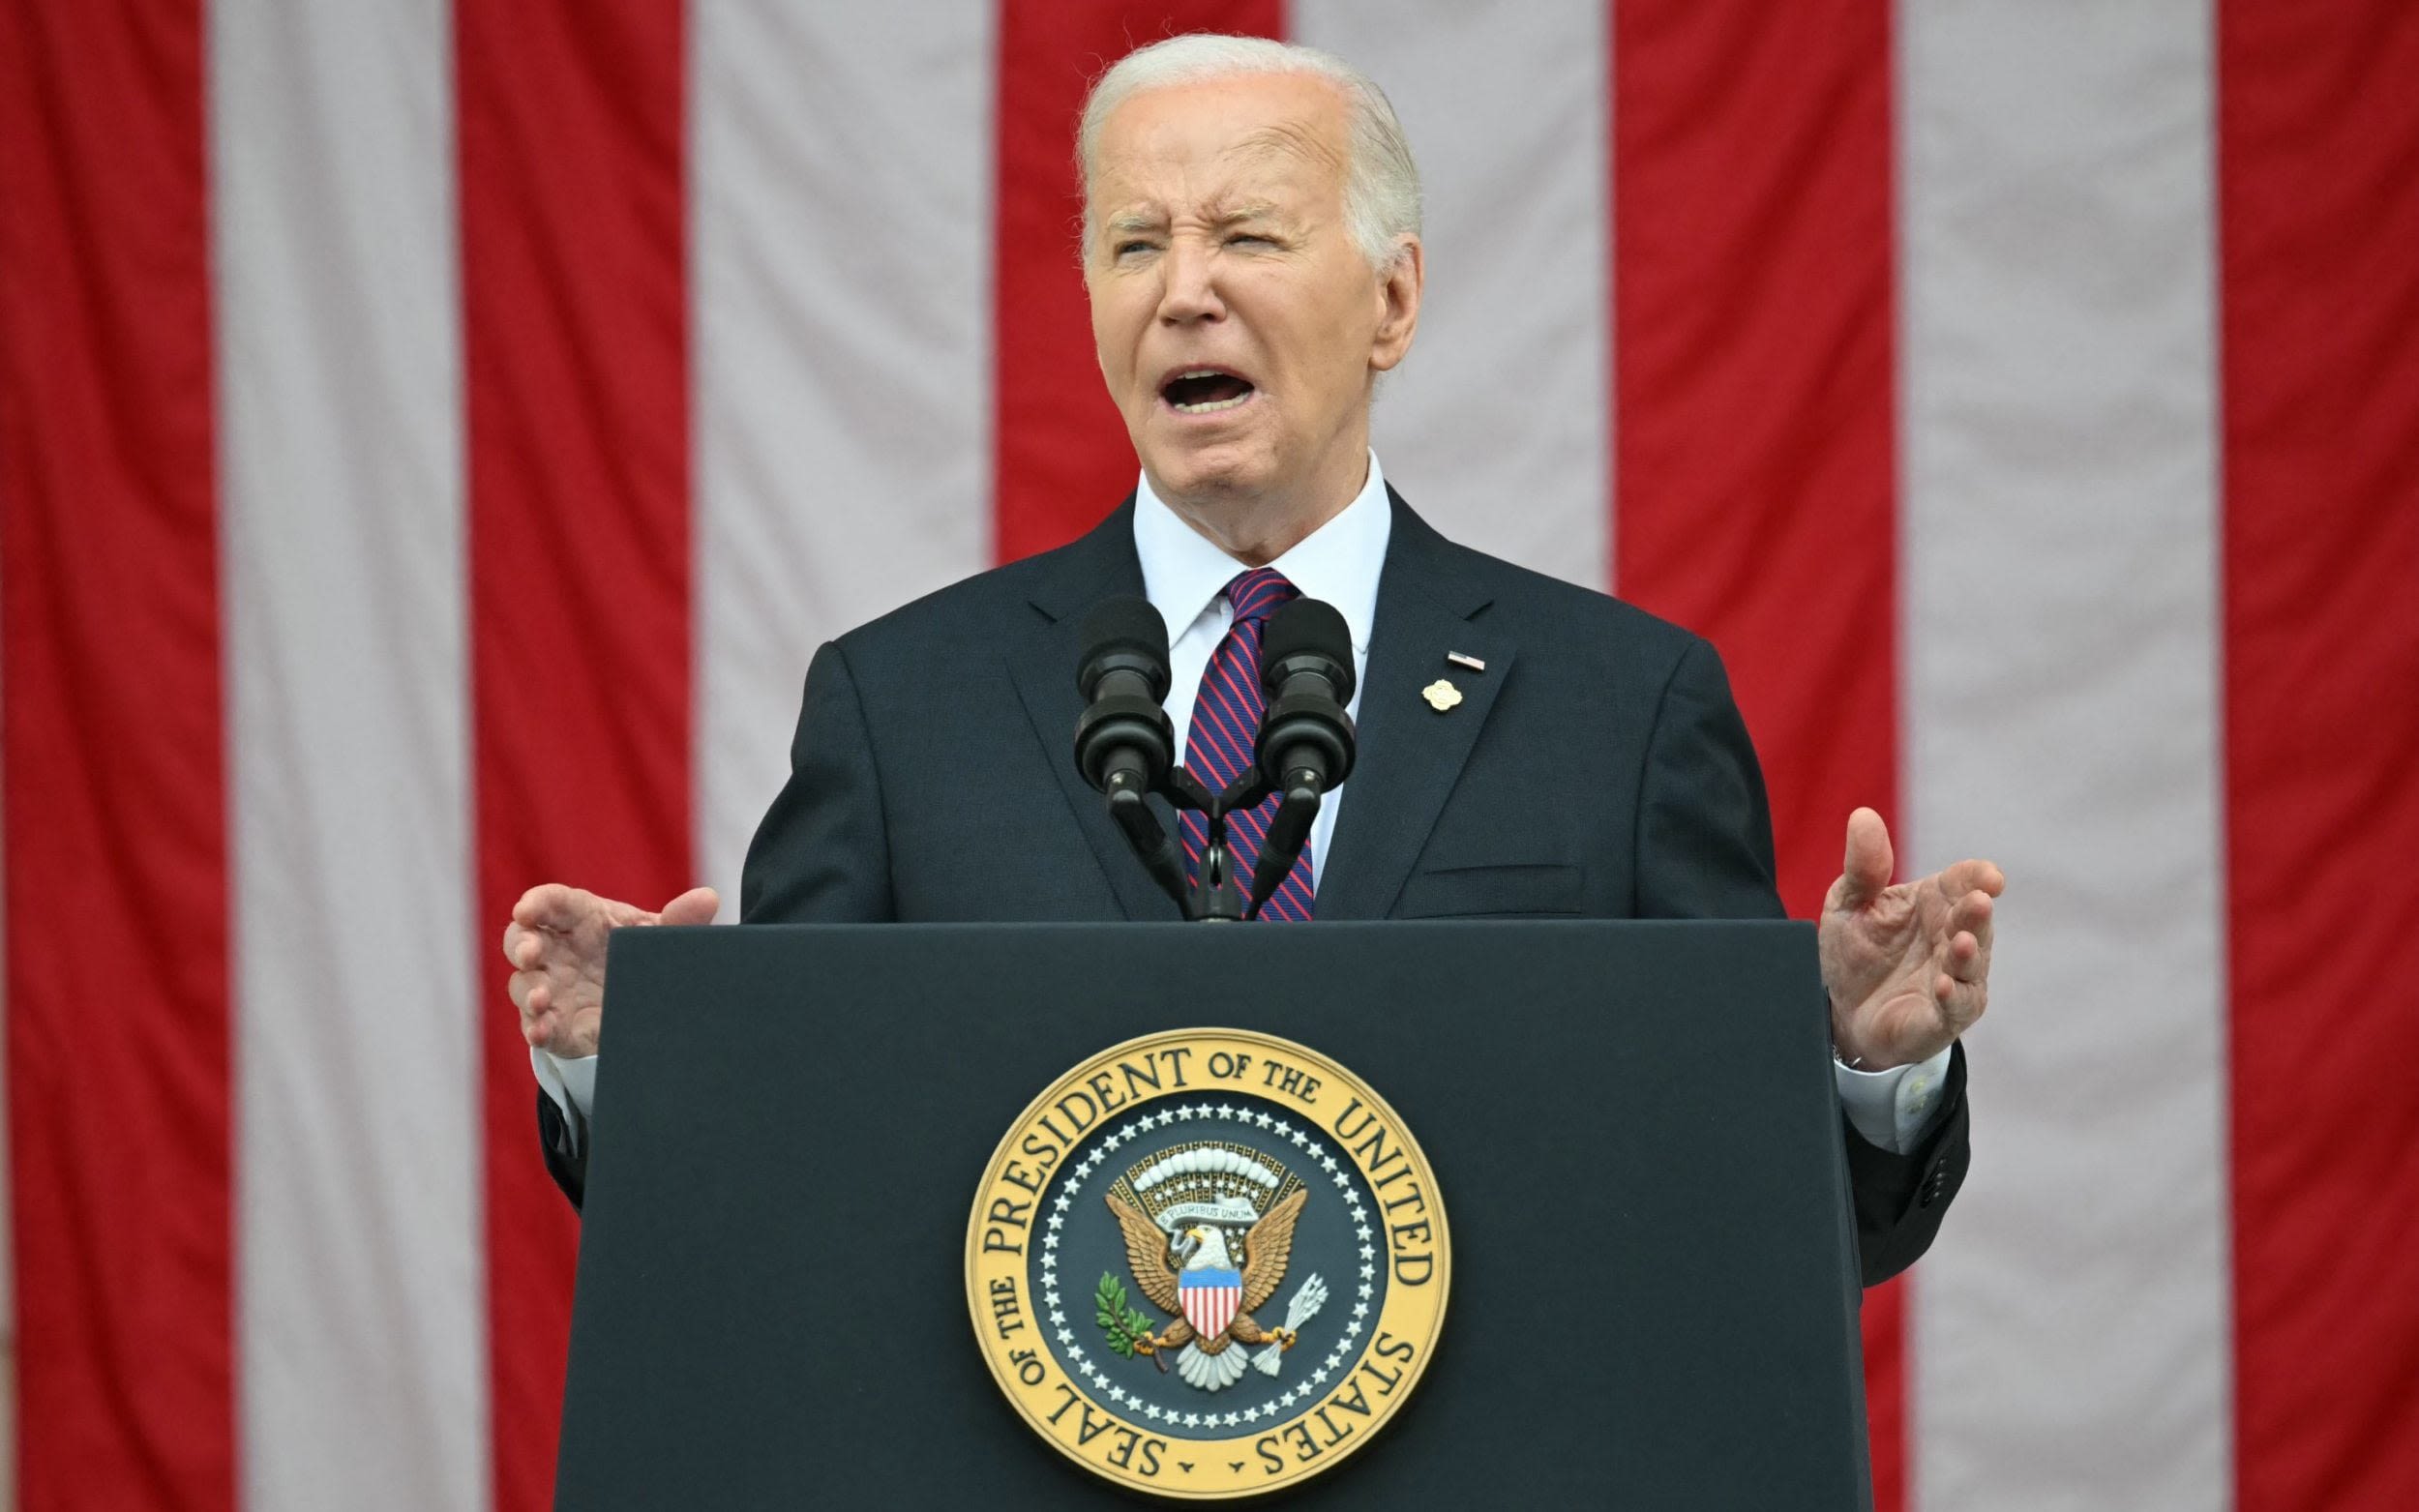 Progressive Biden is a threat to his own party